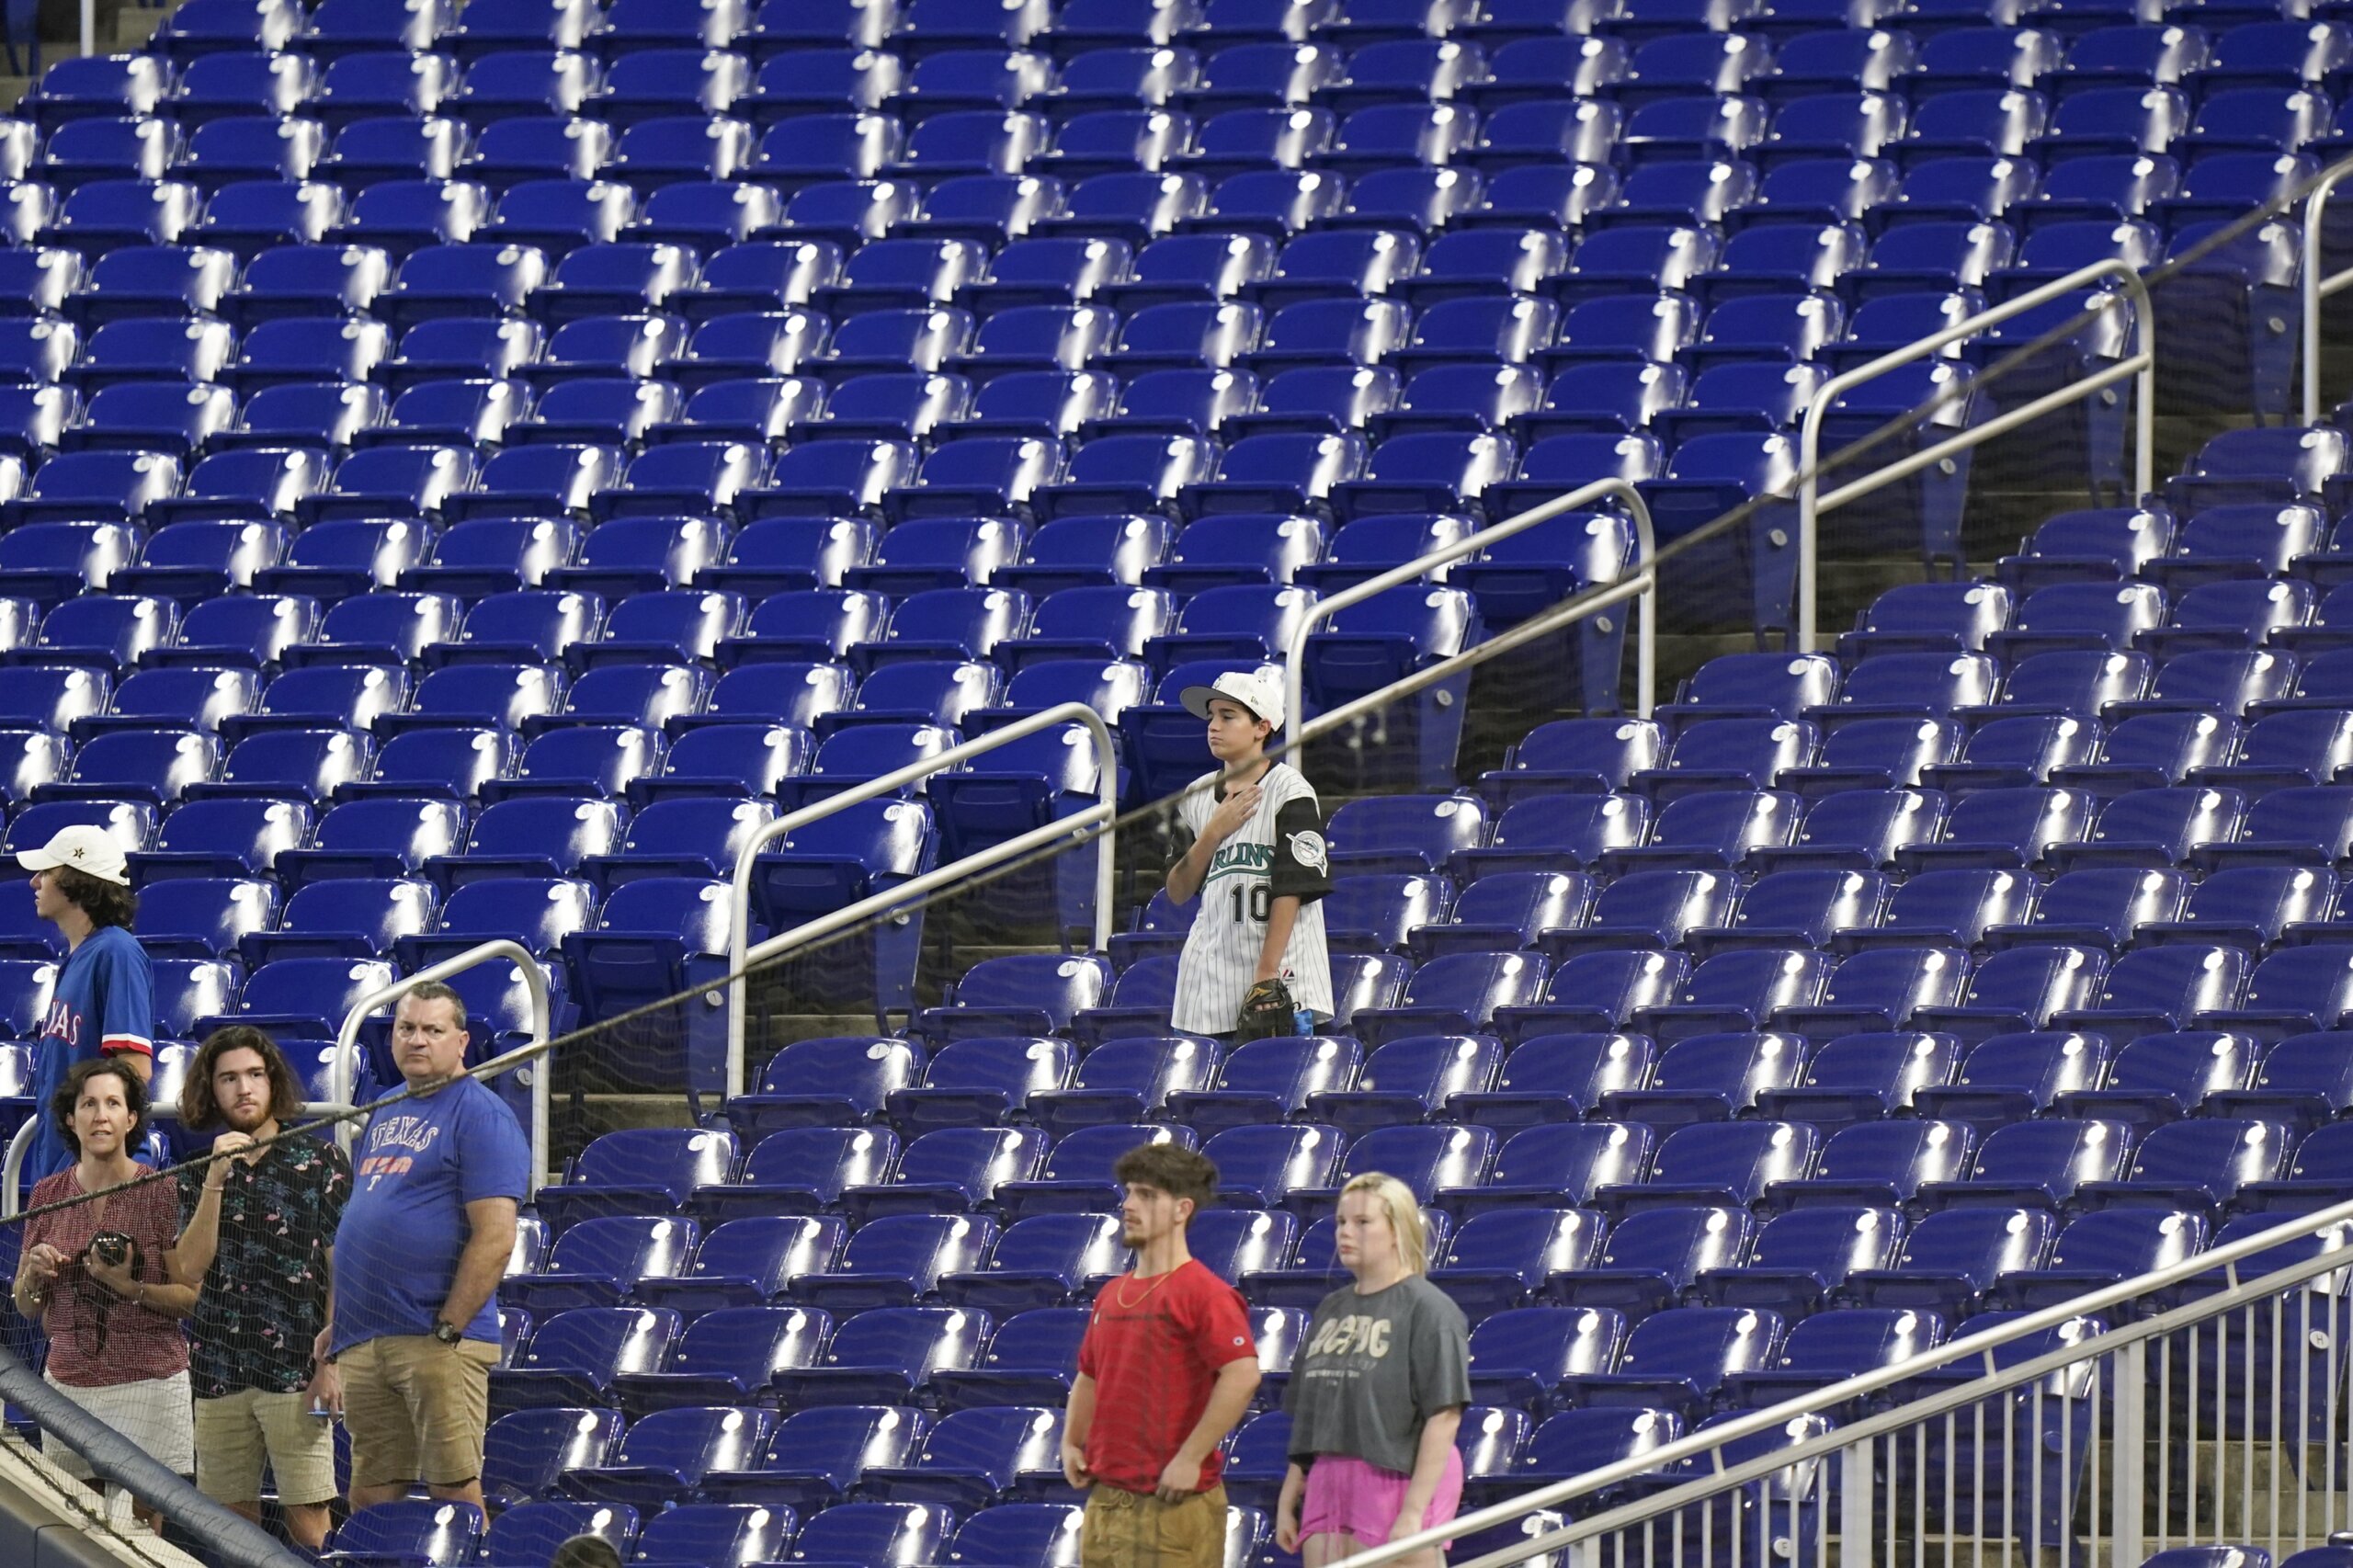 MLB struggling to get attendance back to prepandemic levels WTOP News